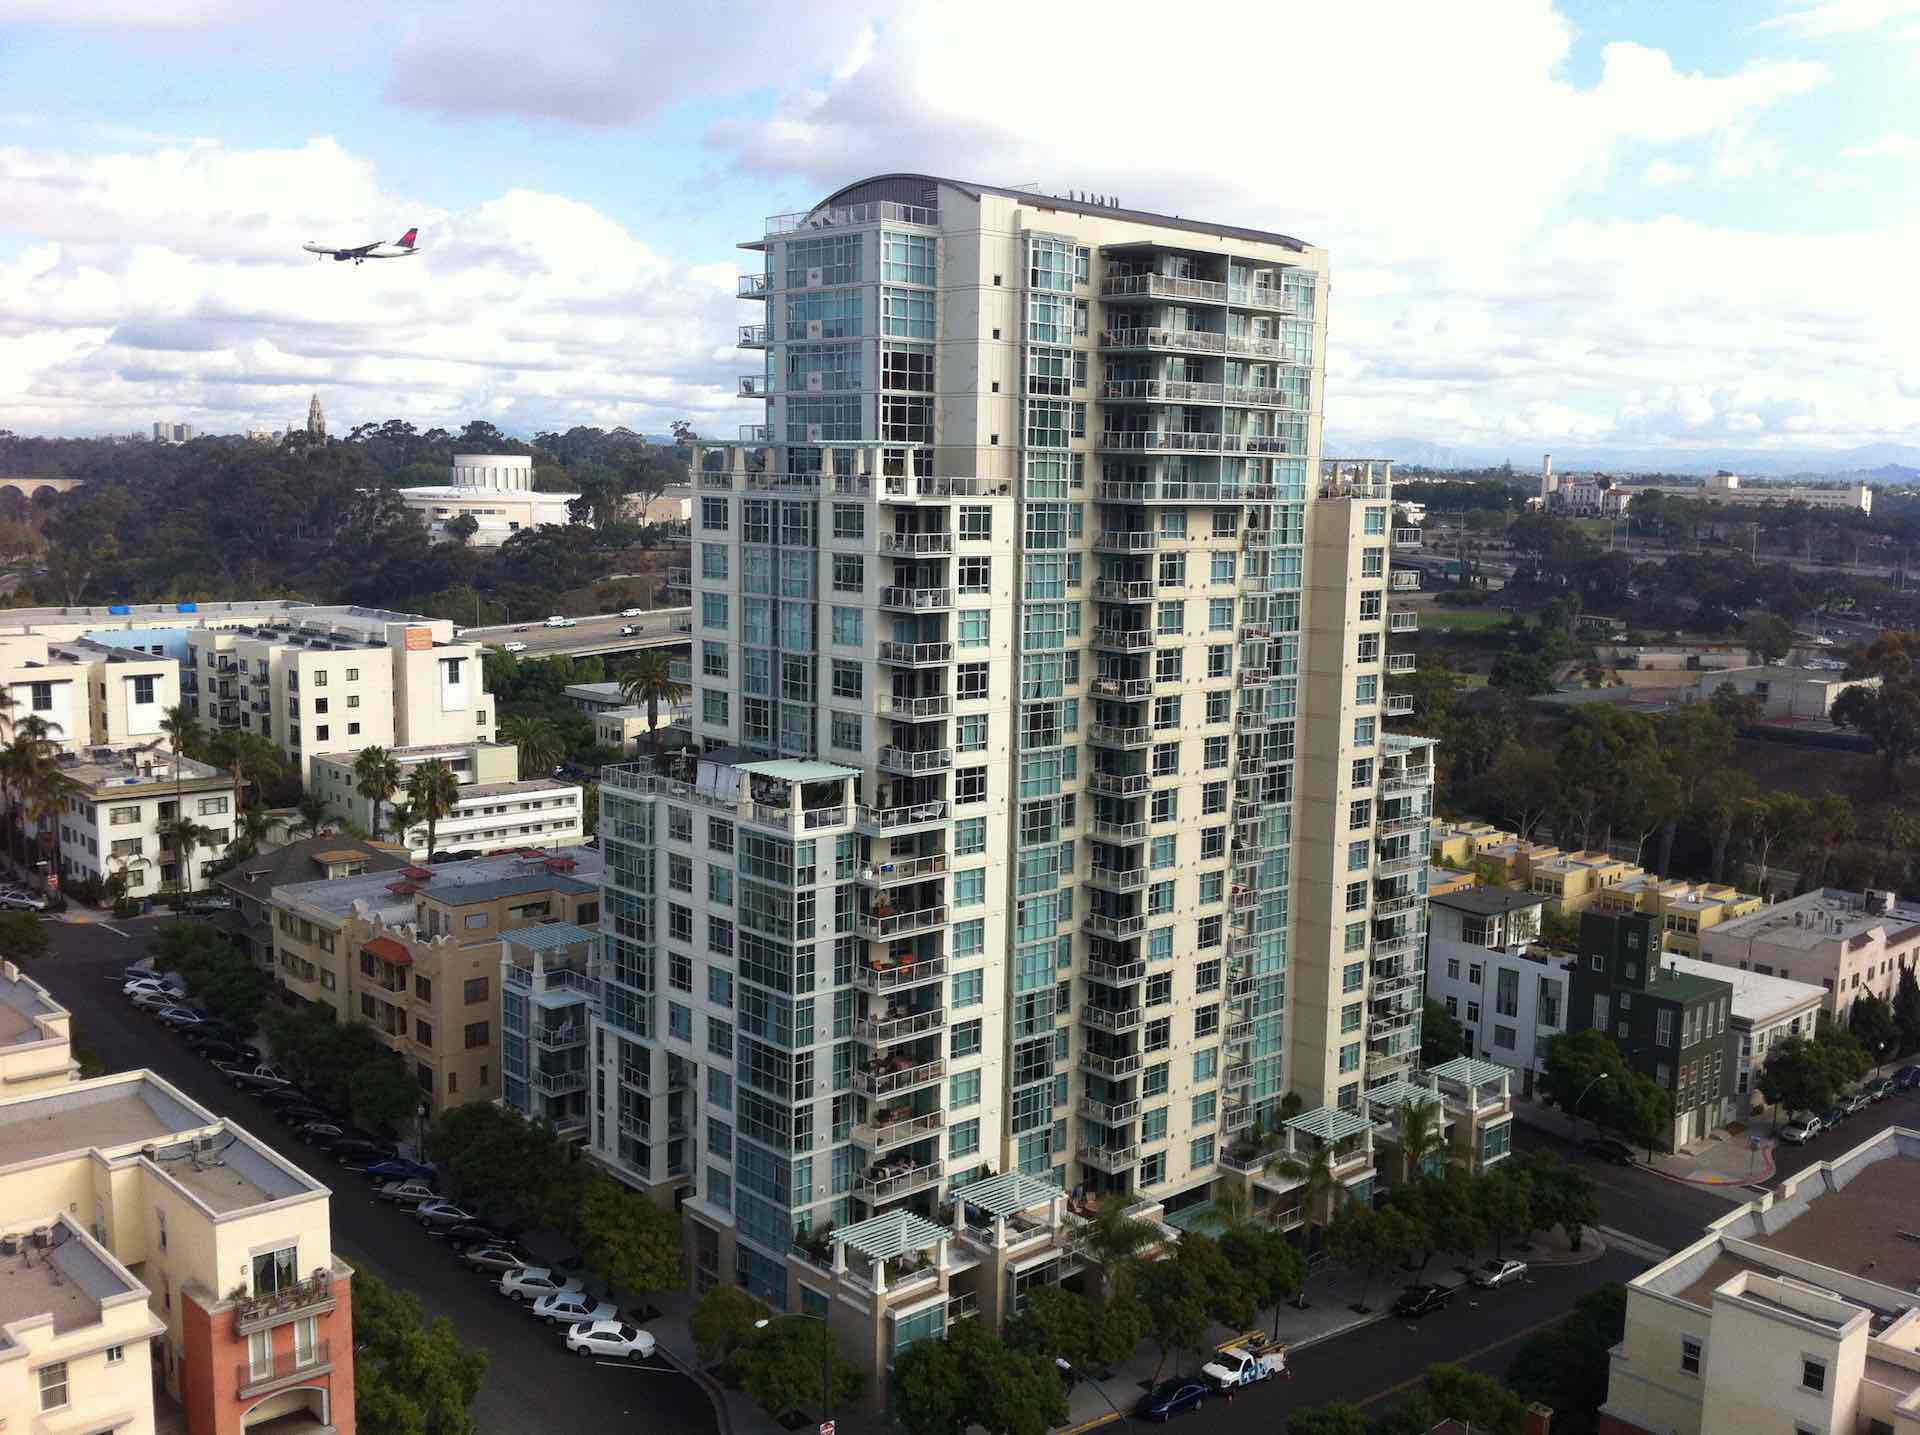 Discovery condos in downtown San Diego Cortez Hill